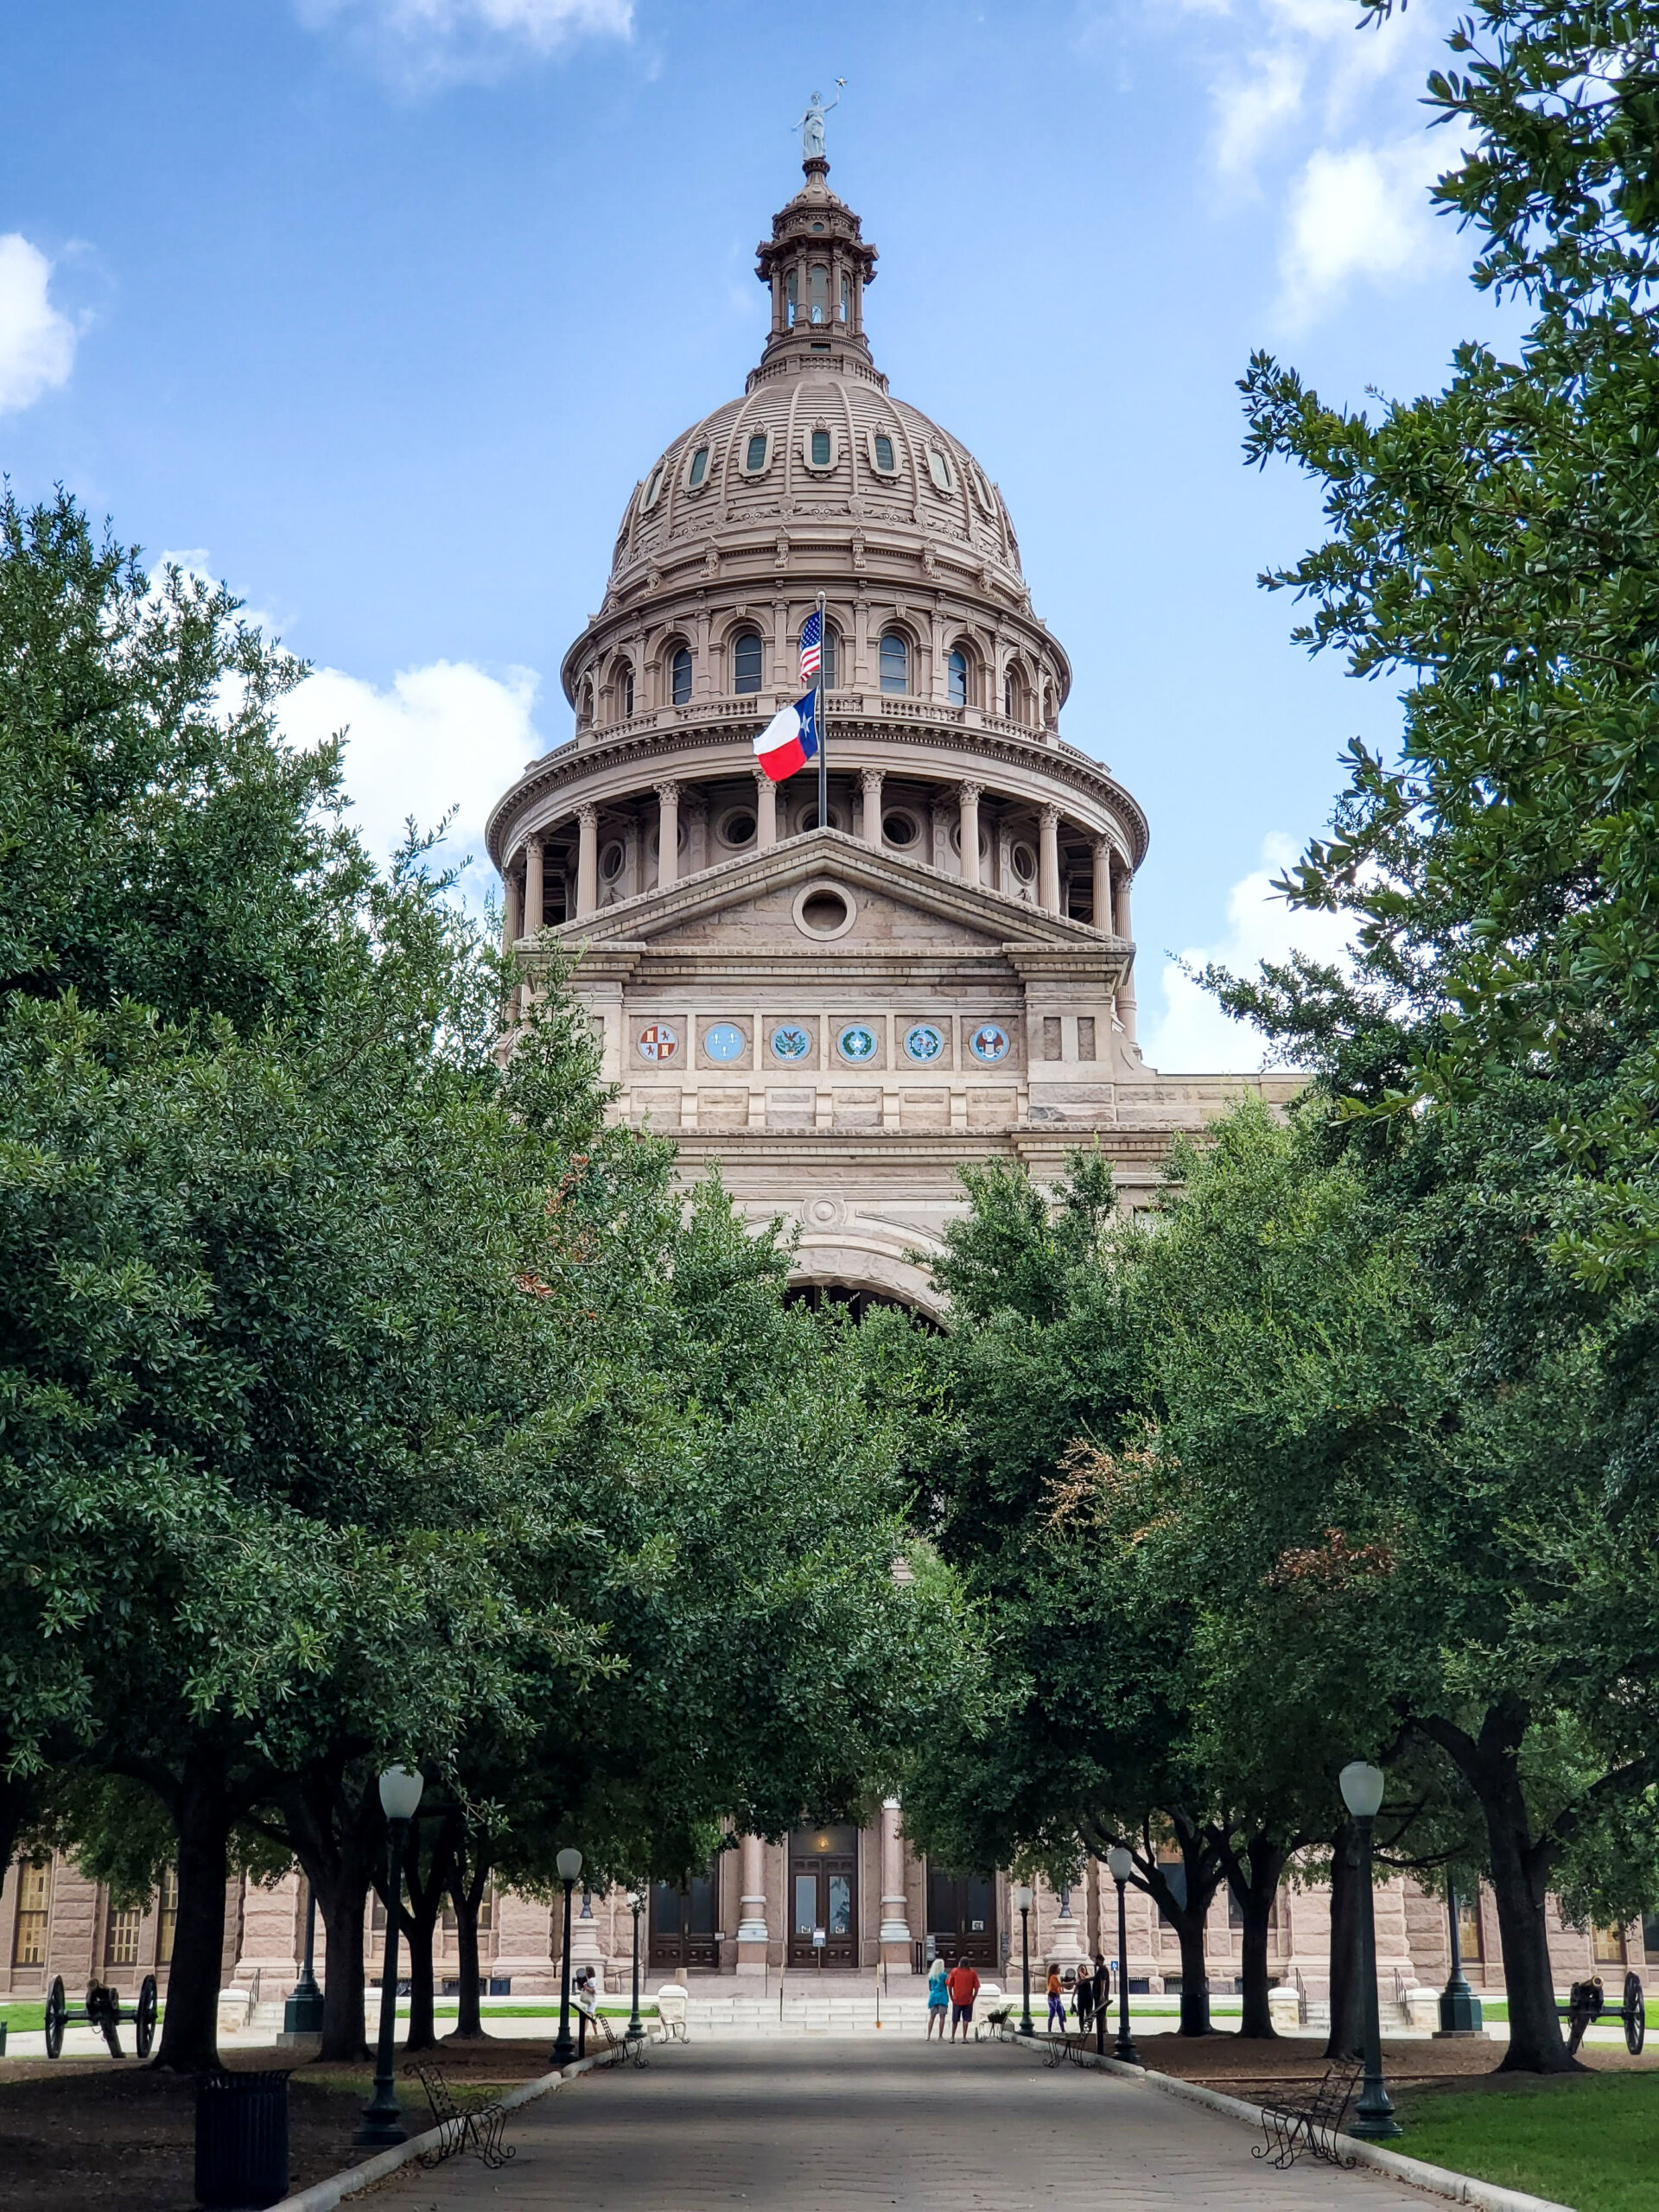 Image of Texas State Capitol in Austin, Texas